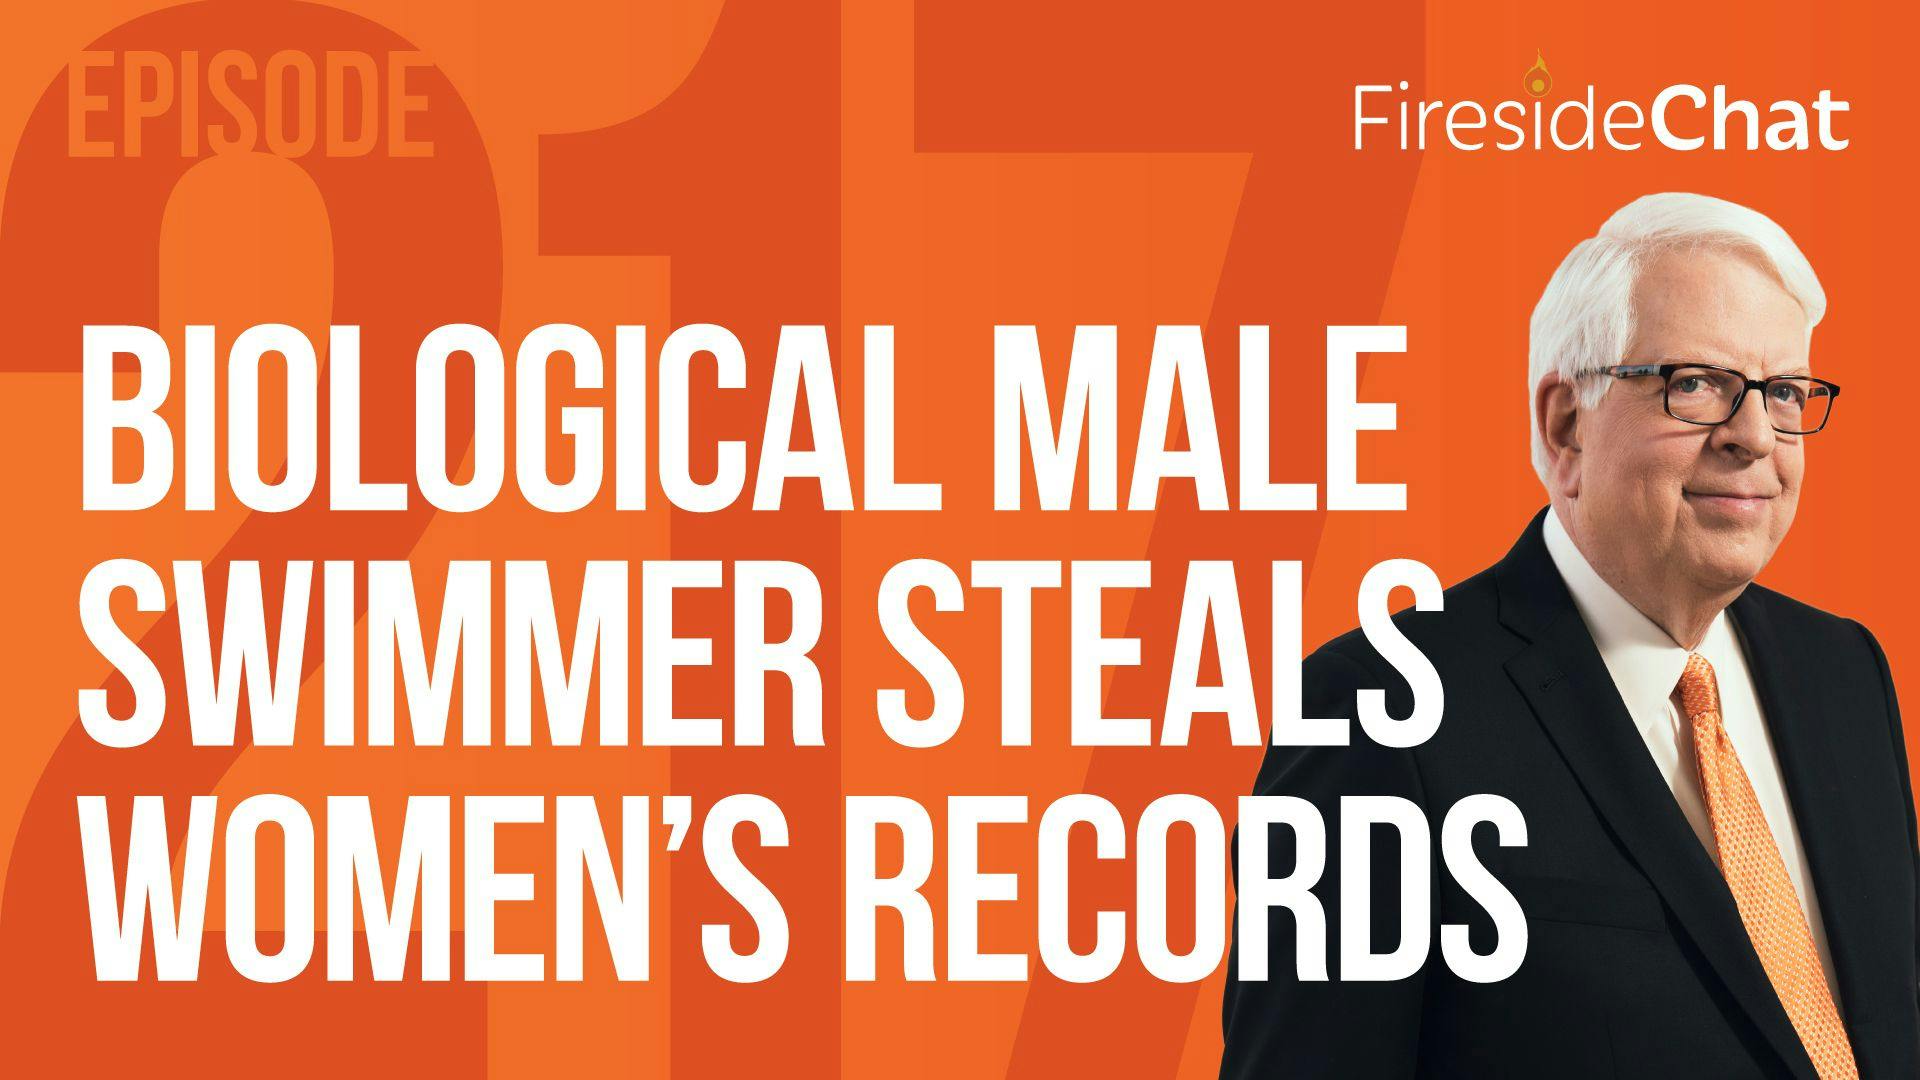 Ep. 217 — Biological Male Swimmer Steals Women's Records 